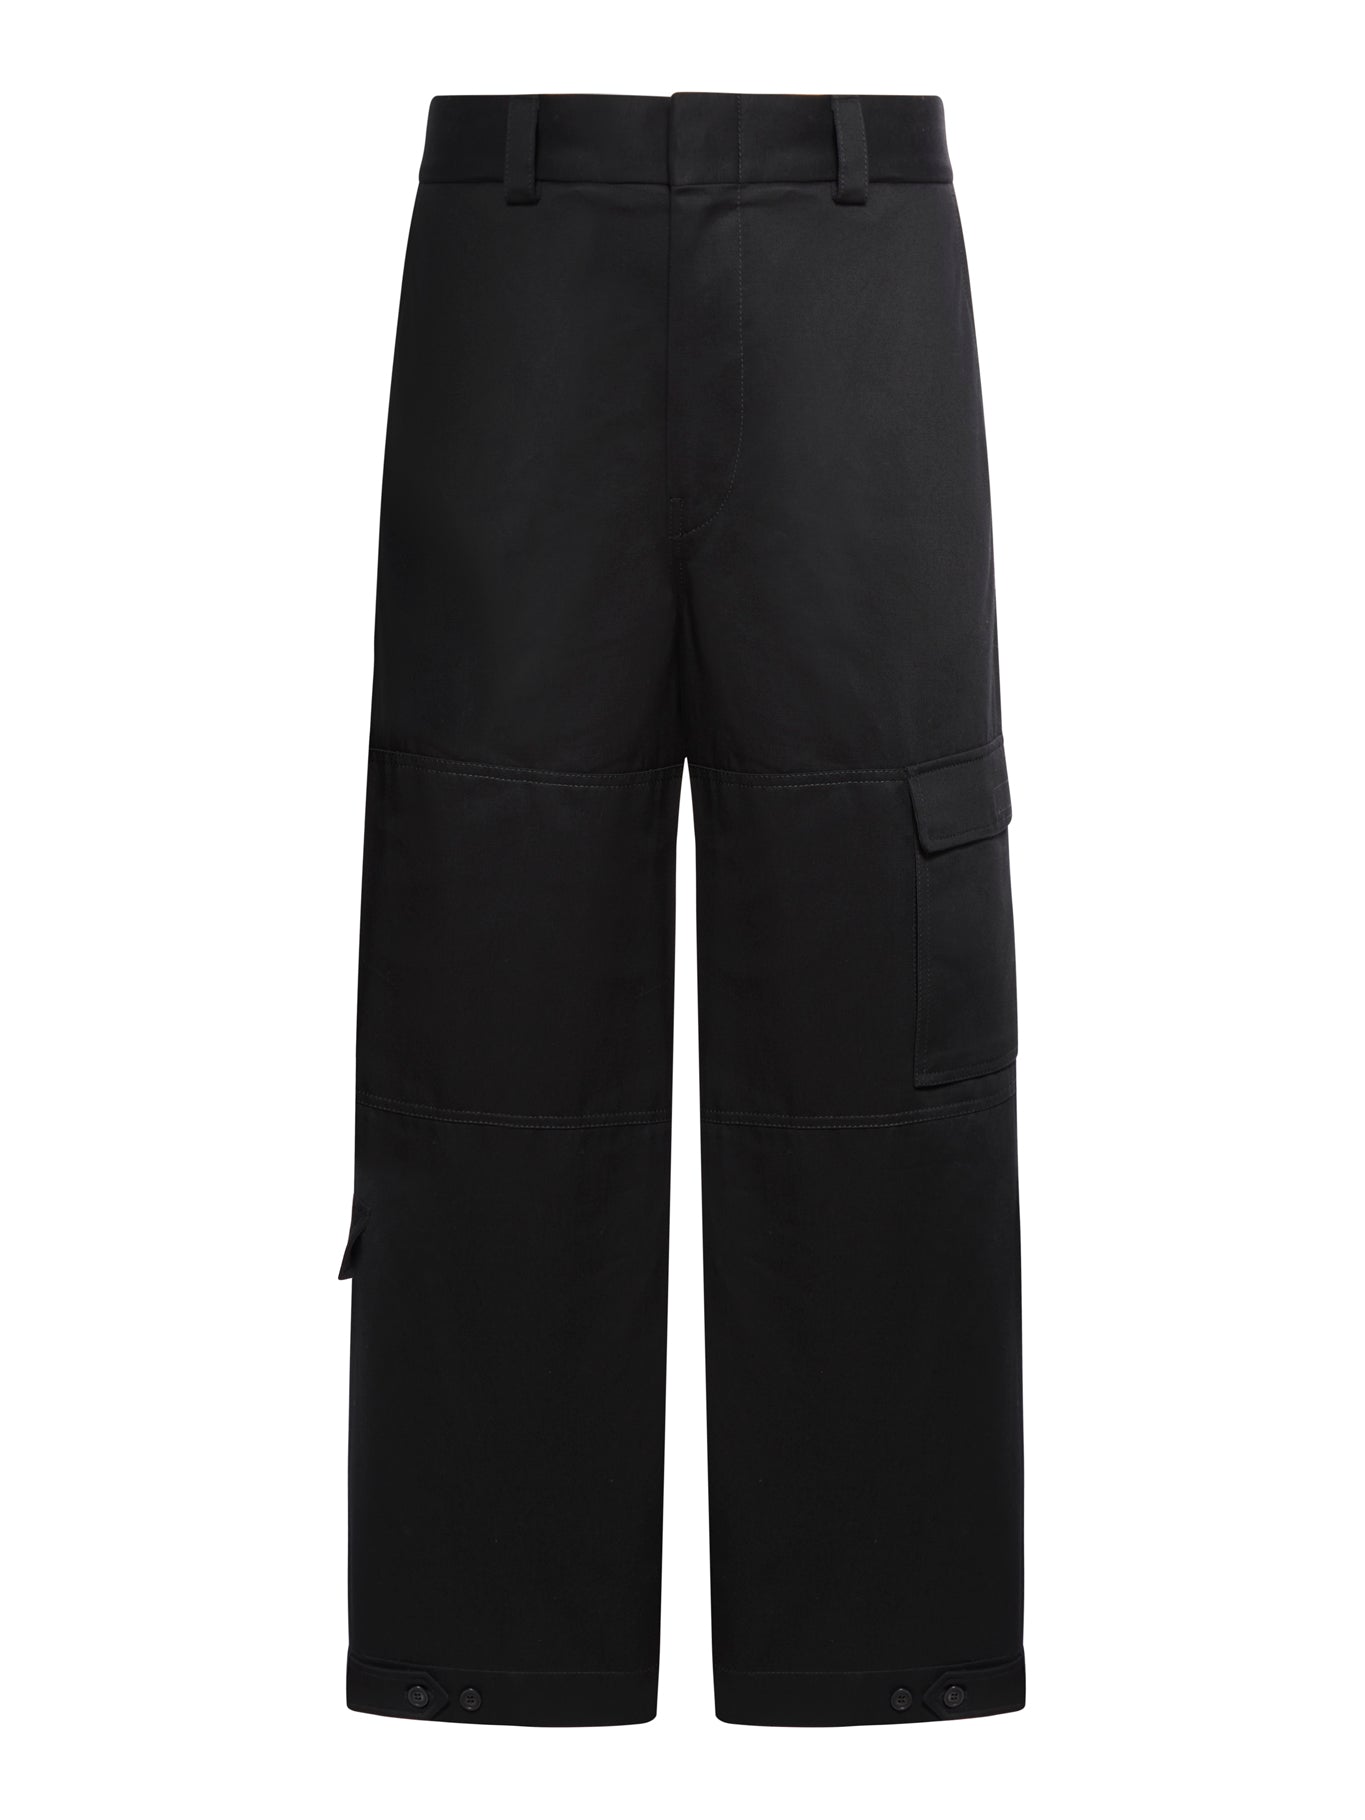 CARGO PANTS IN COTTON DRILL WITH PATCH